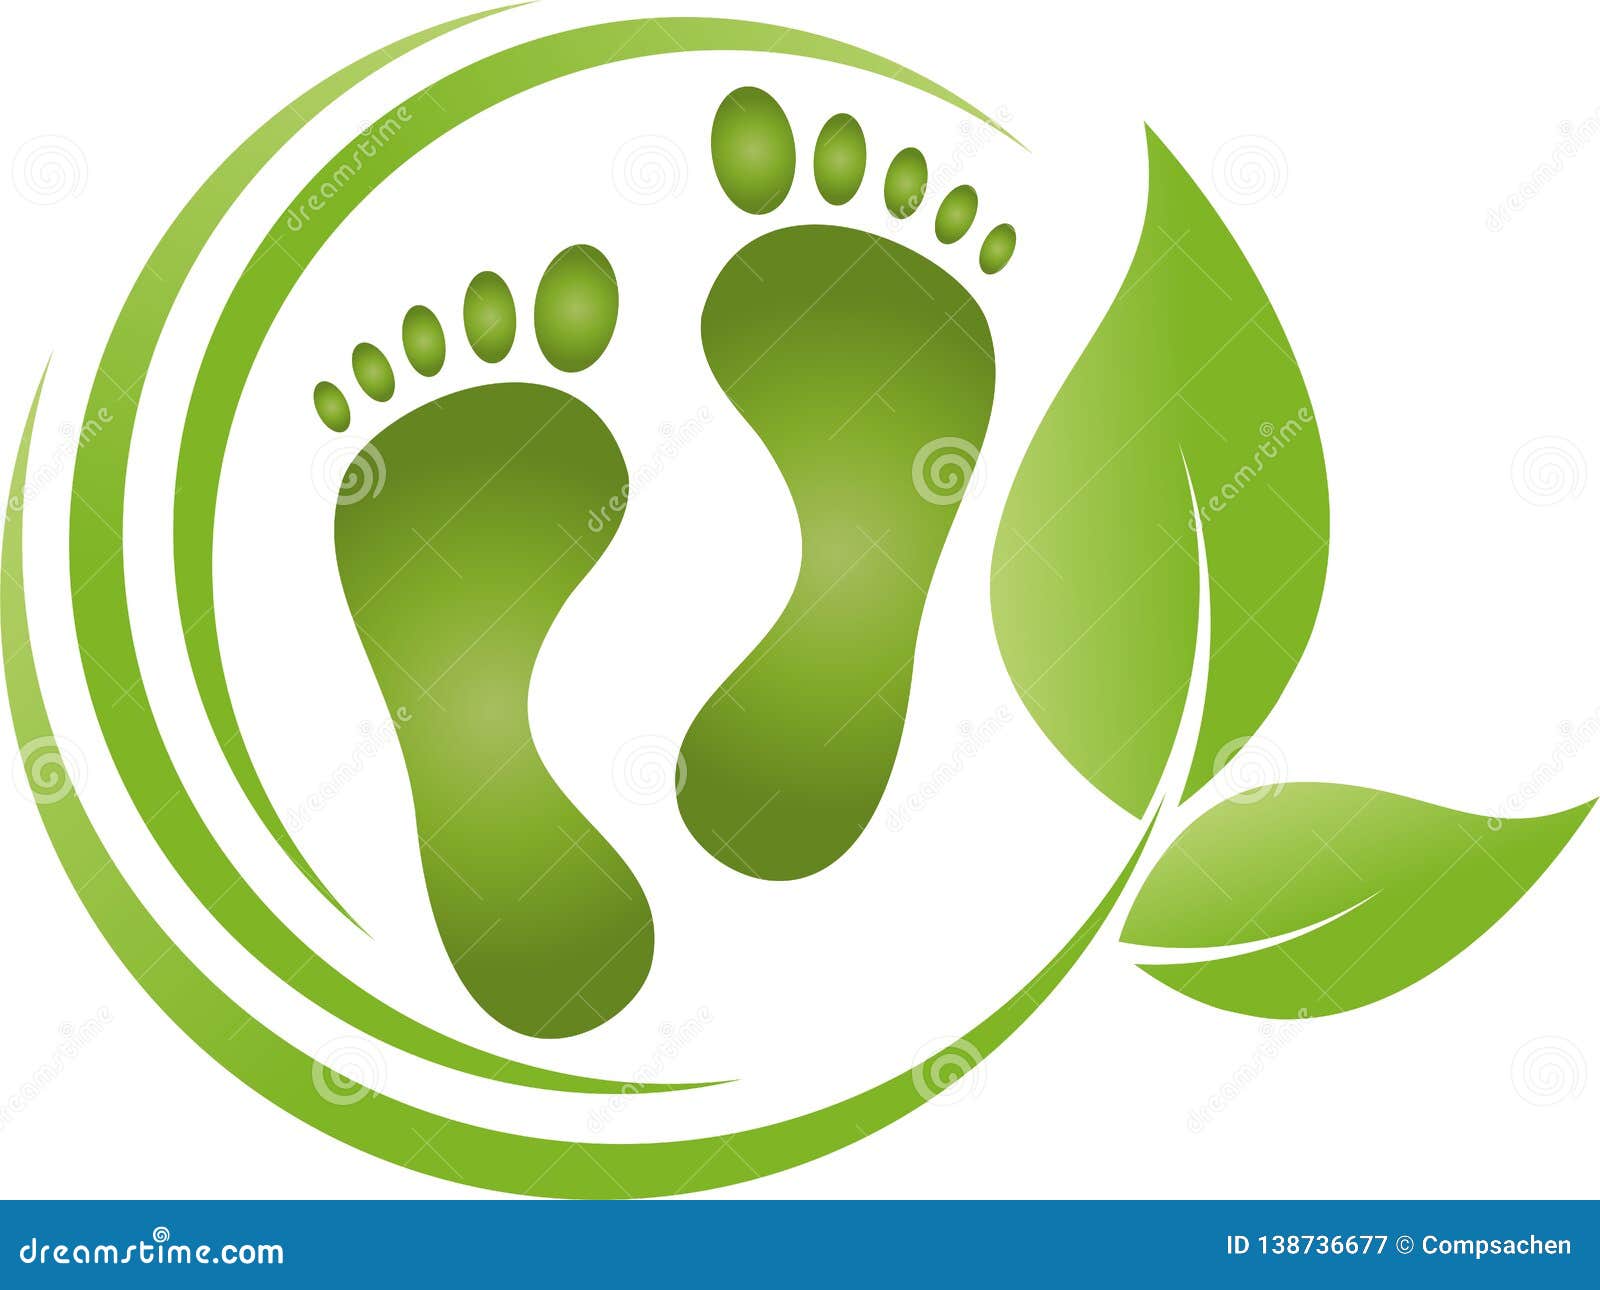 two feet and leaves, foot care and podiatry logo